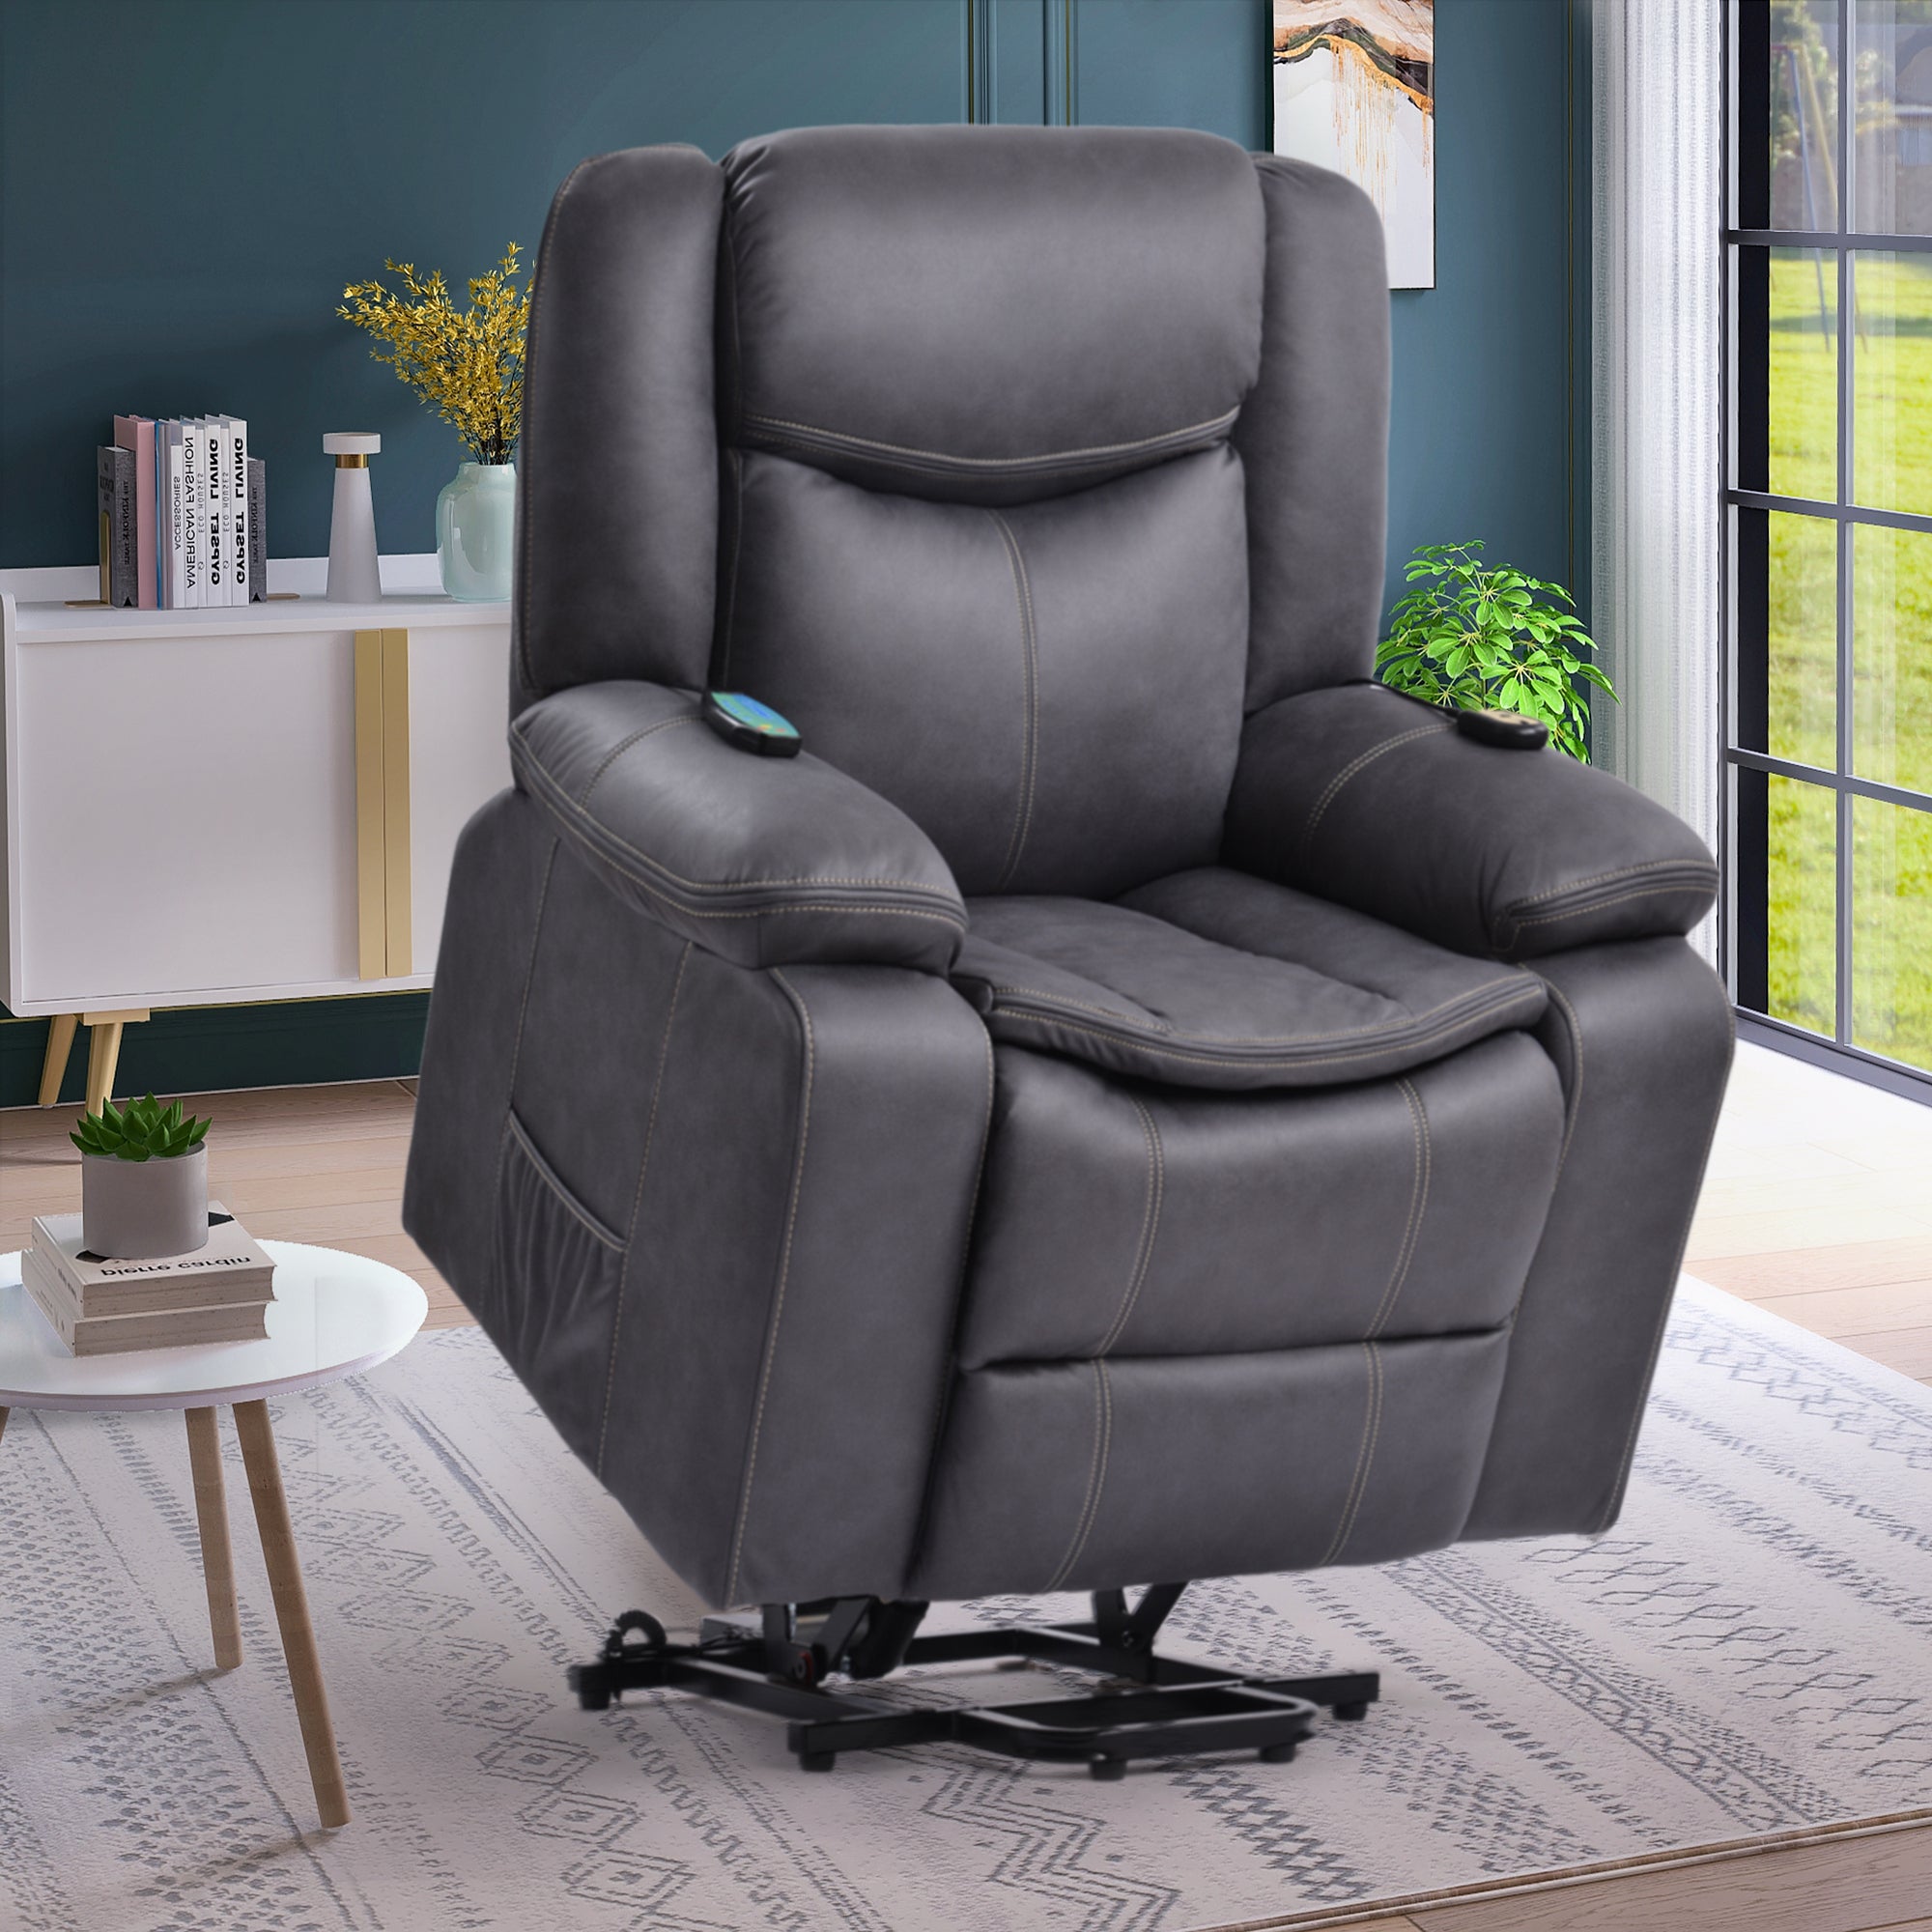 Power Lift Recliner Chair with Heat and Massage, lifted